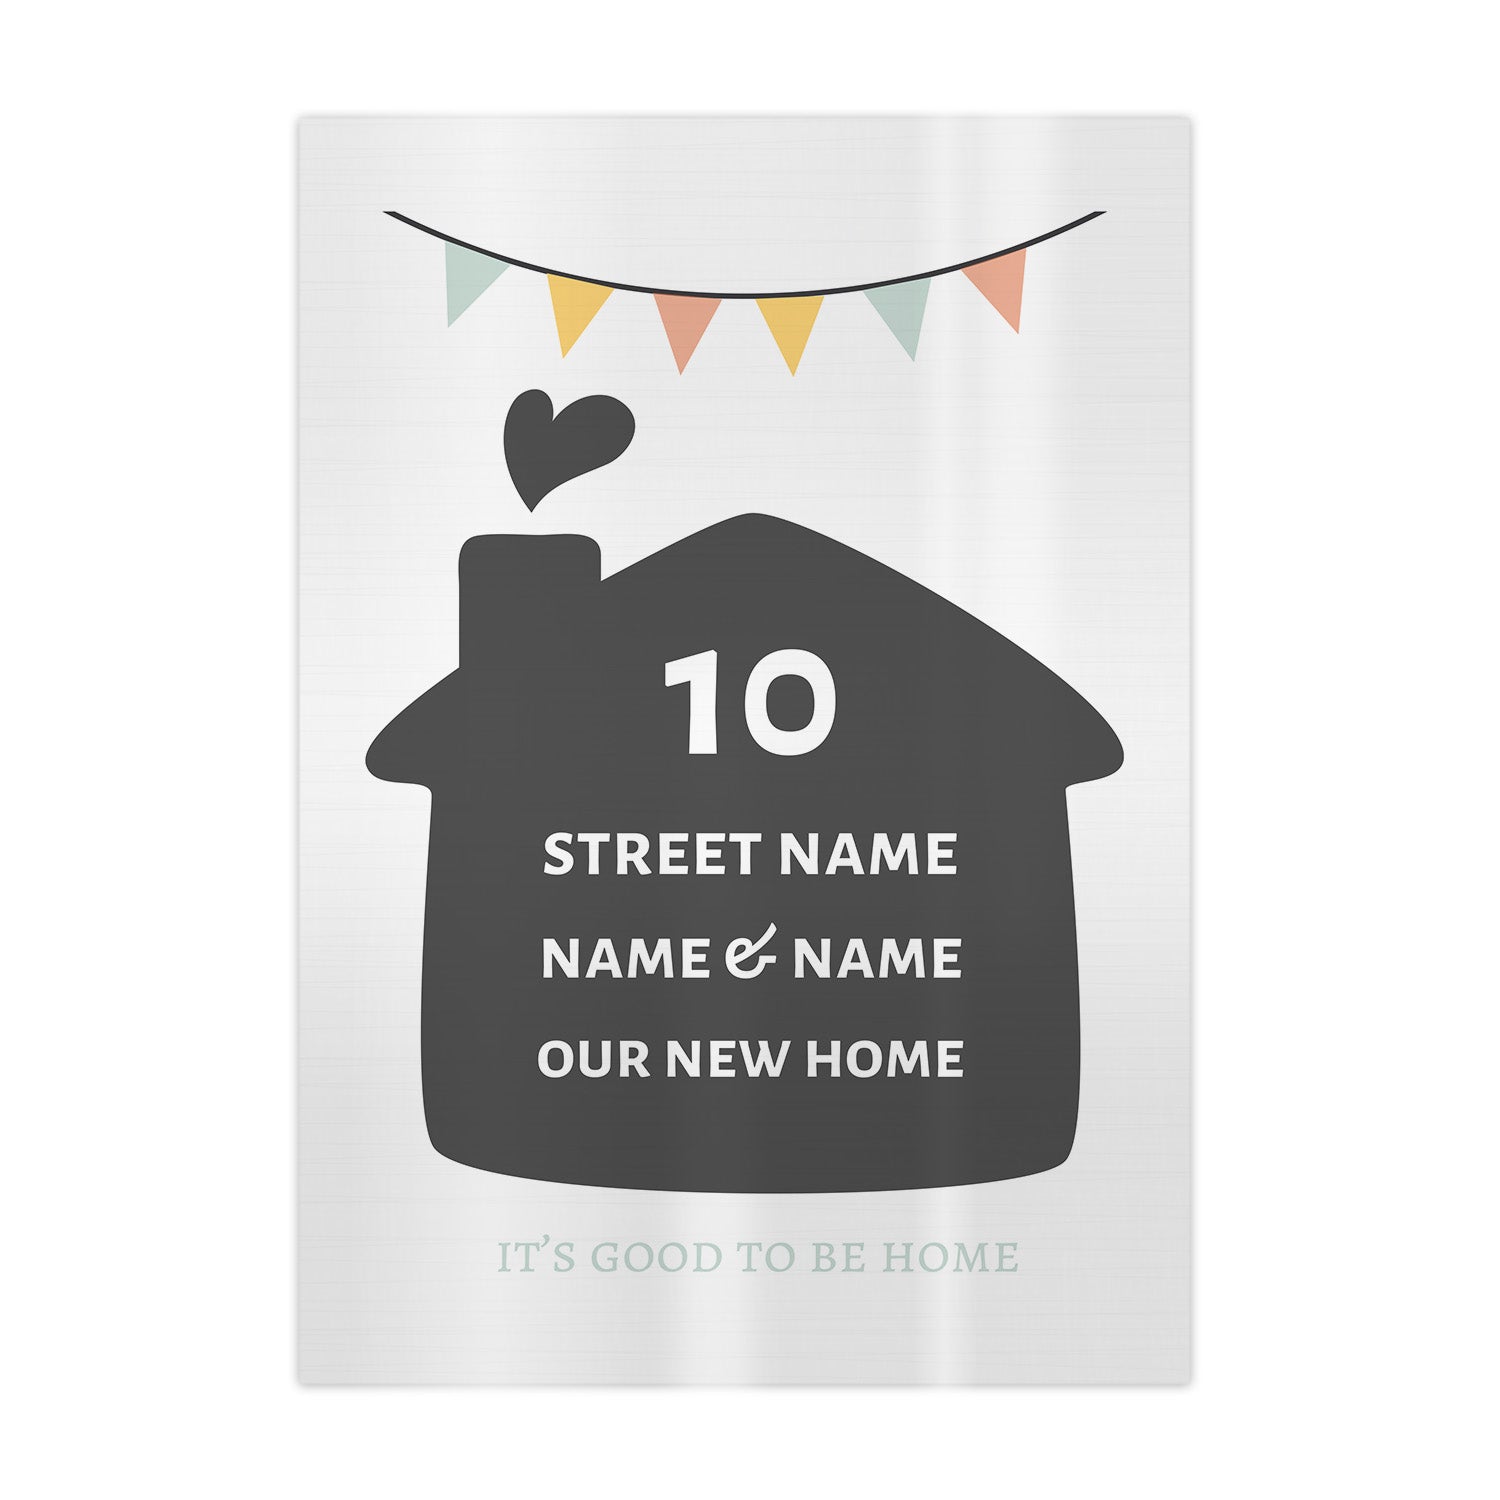 Personalised Home - Custom Colour - A4 Metal Sign Plaque - Frame Options Available  10 STREET NAME NAME NAME OUR NEW HOME 